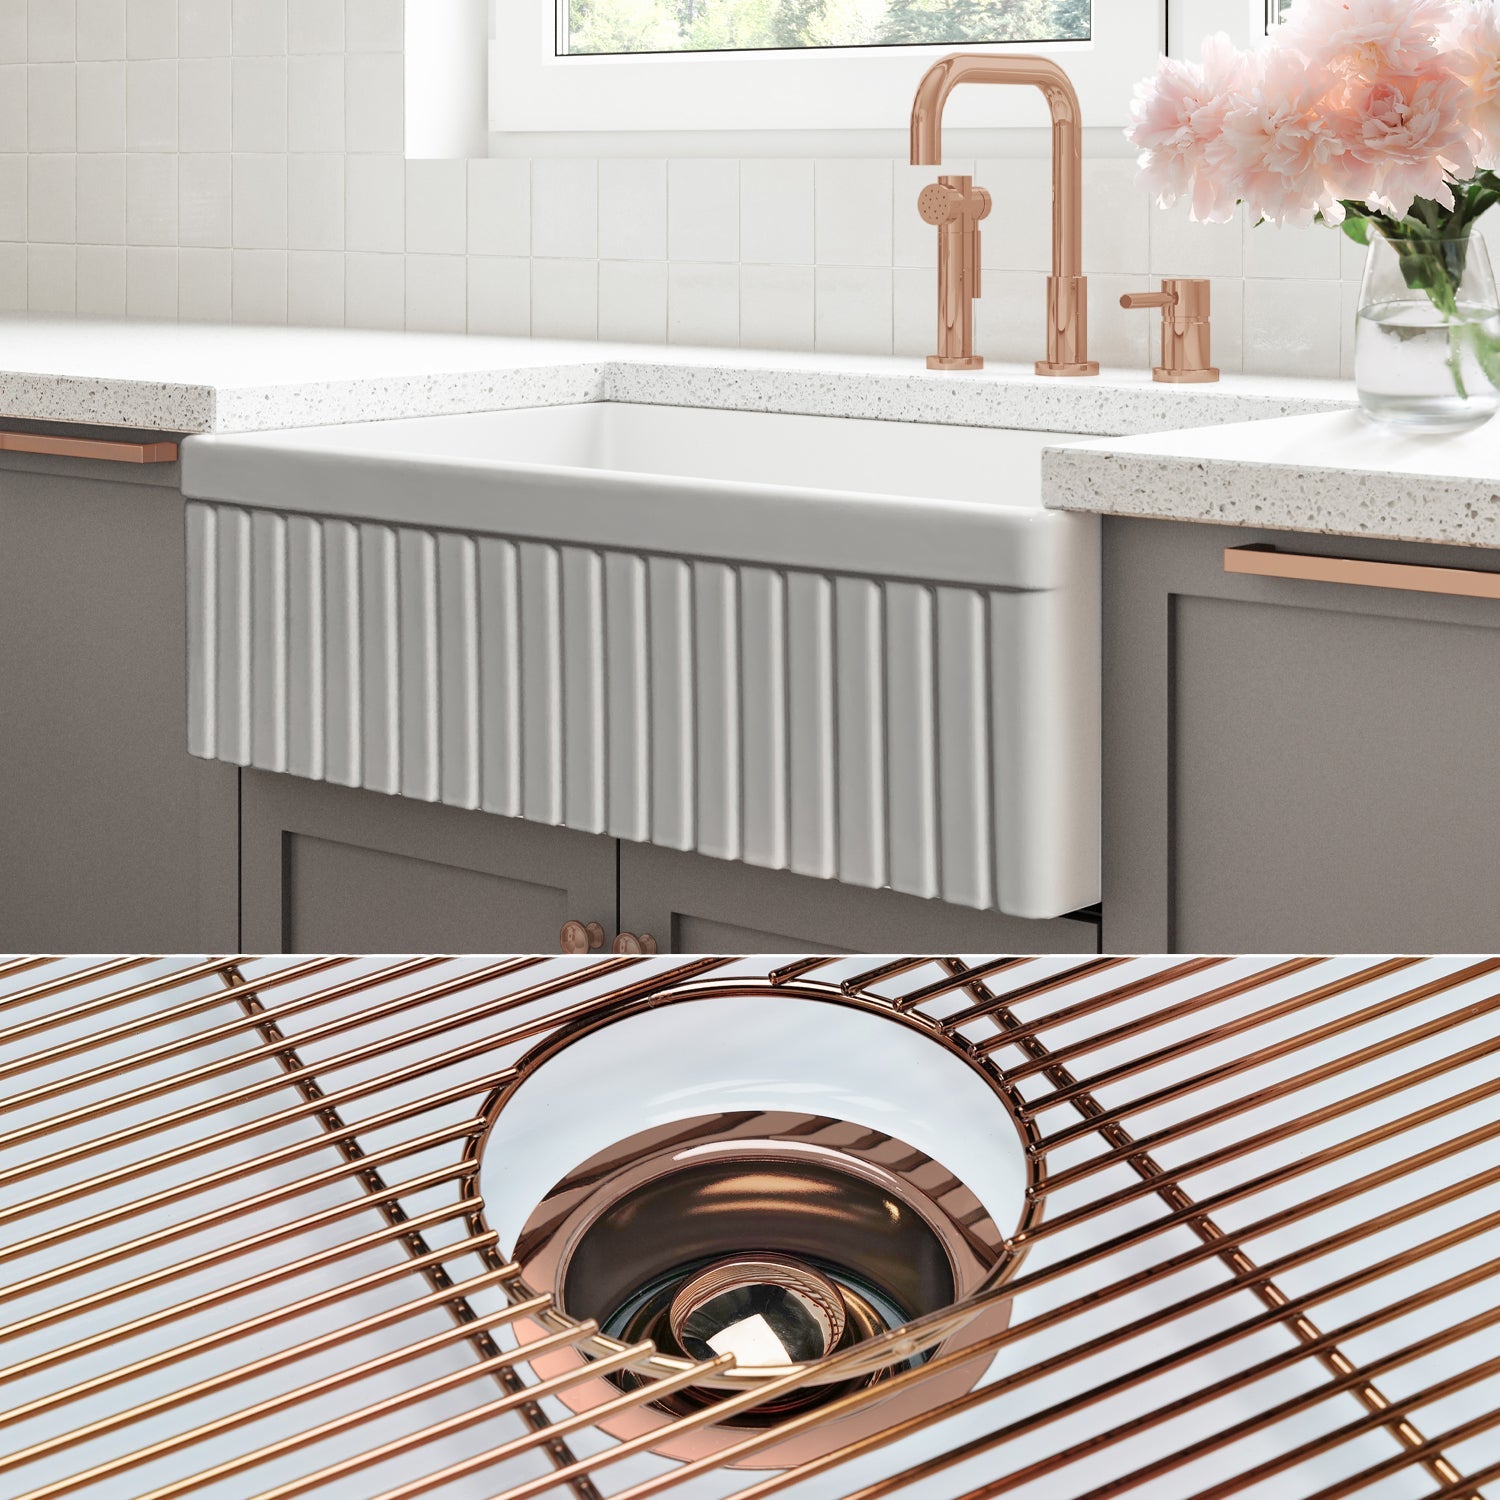 FSW1007RG LUXURY 33-INCH SOLID FIRECLAY FARMHOUSE SINK IN WHITE, POL. ROSE GOLD ACCS, FLUTED FRONT